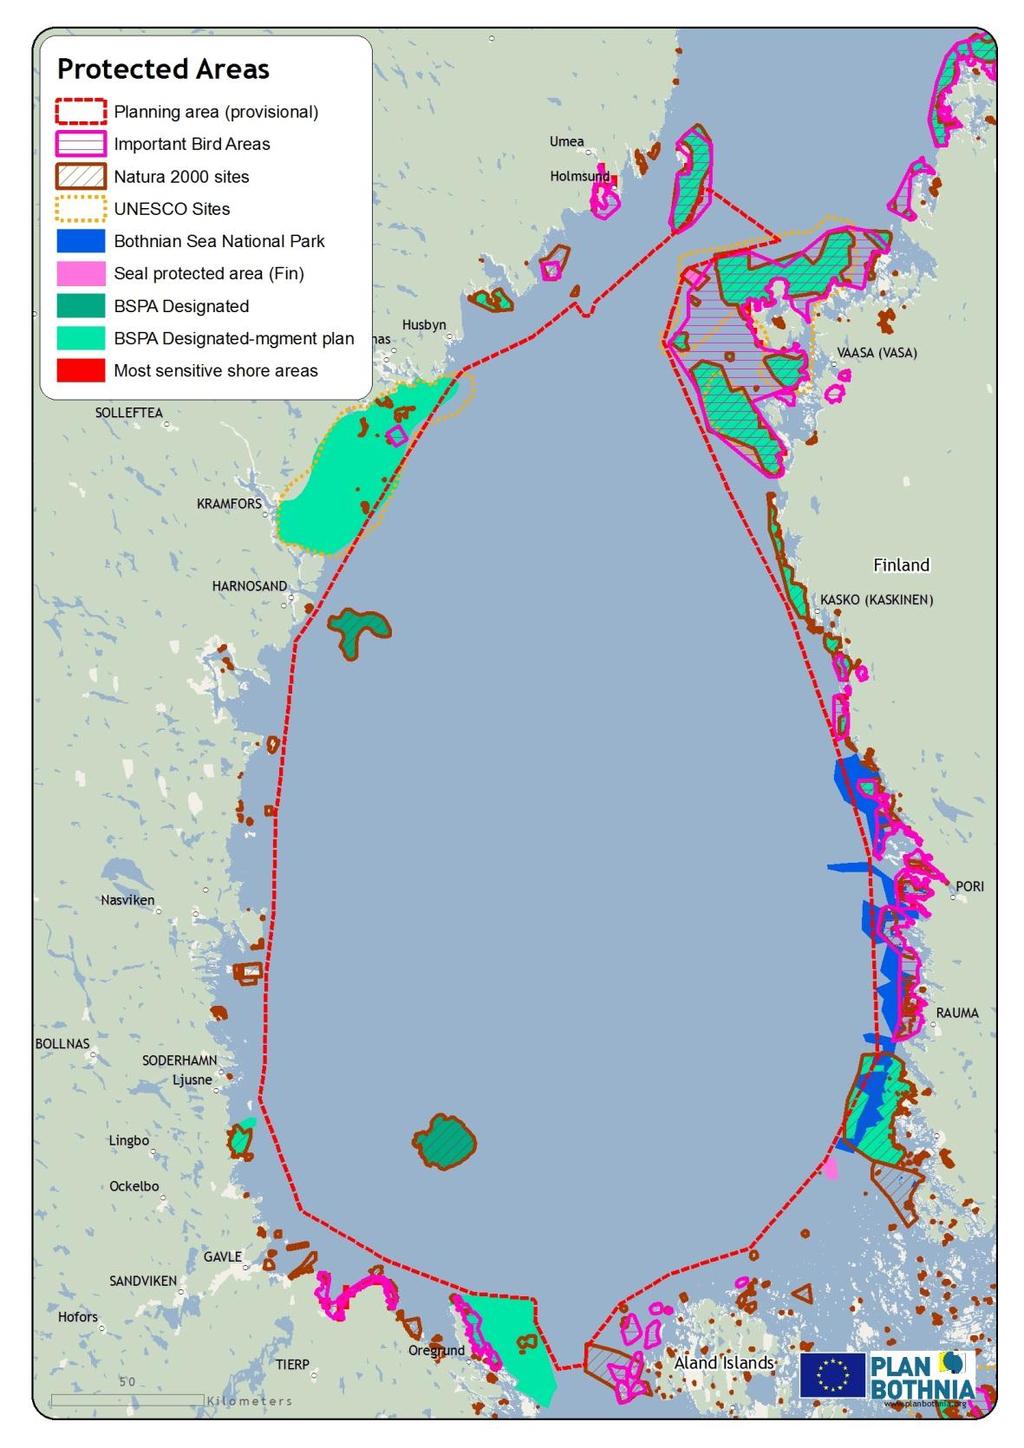 Existing protected areas in the Bothnian Sea A number of sites in the Plan Bothnia area have been designated as protected areas based on either national/eu legislation or international agreements.